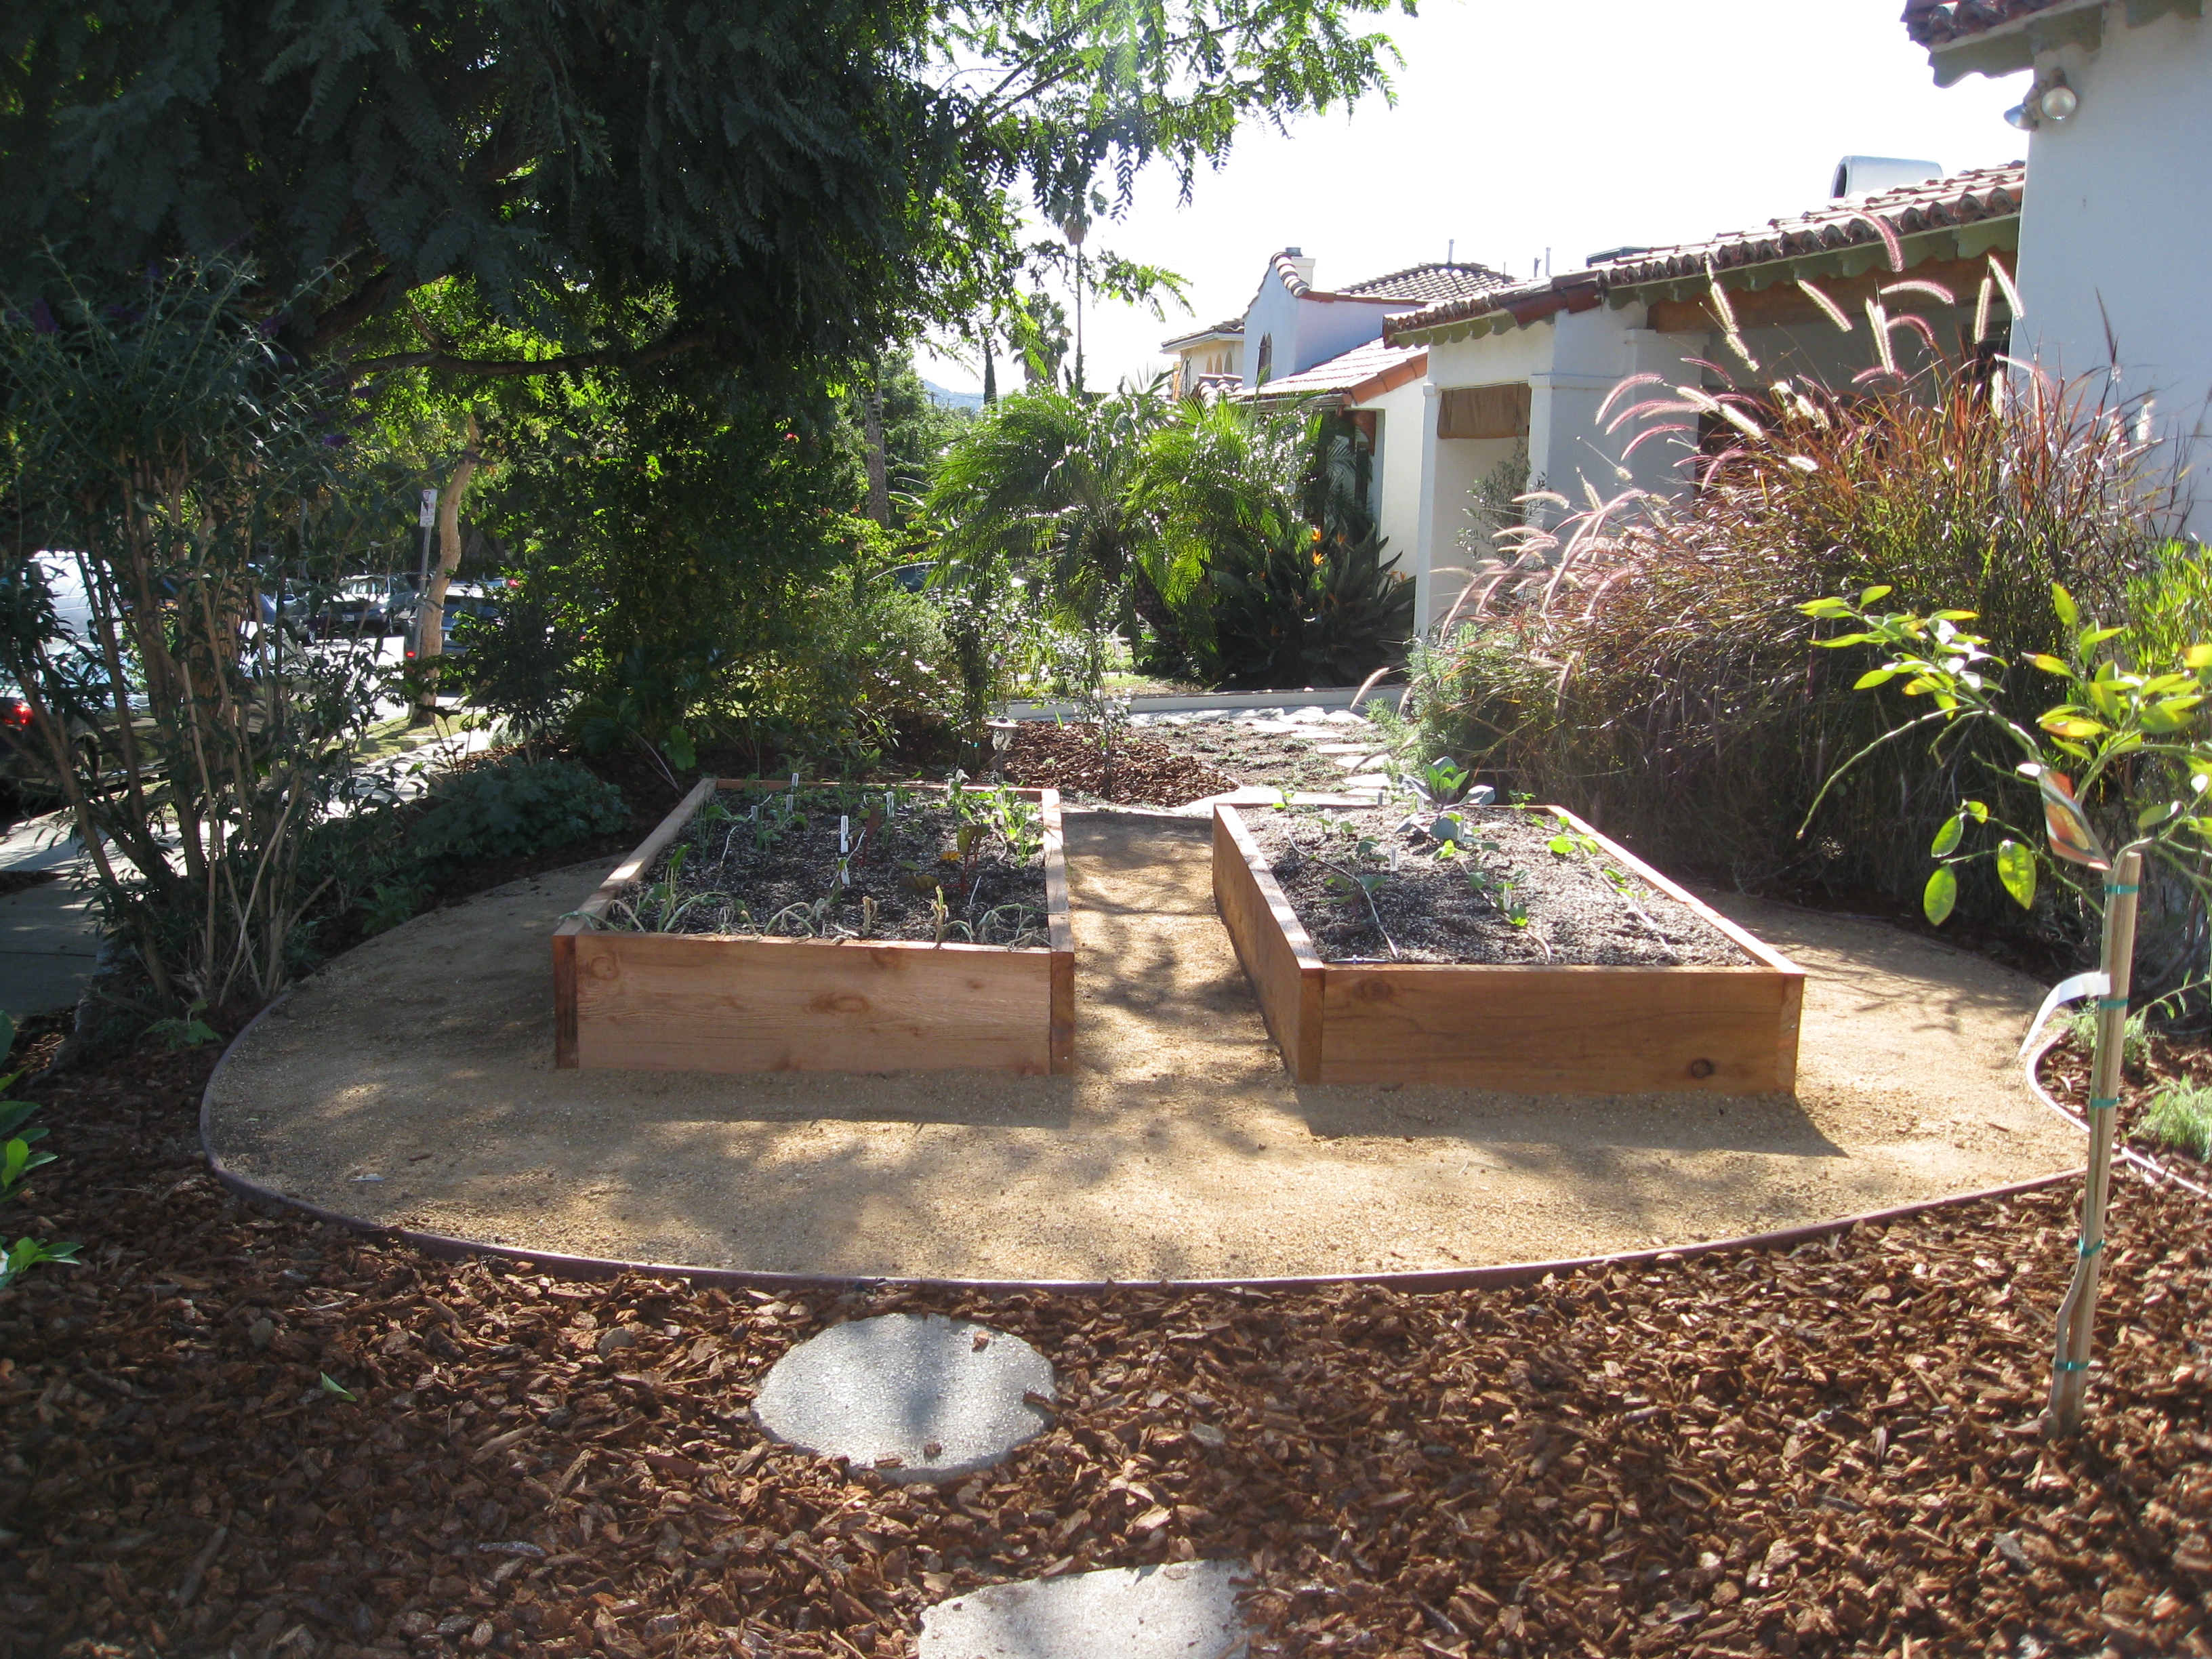 The new raised beds are still in a little bit of shade, but in the sunniest part of the yard. Surrounded by fruit trees and native plants. 